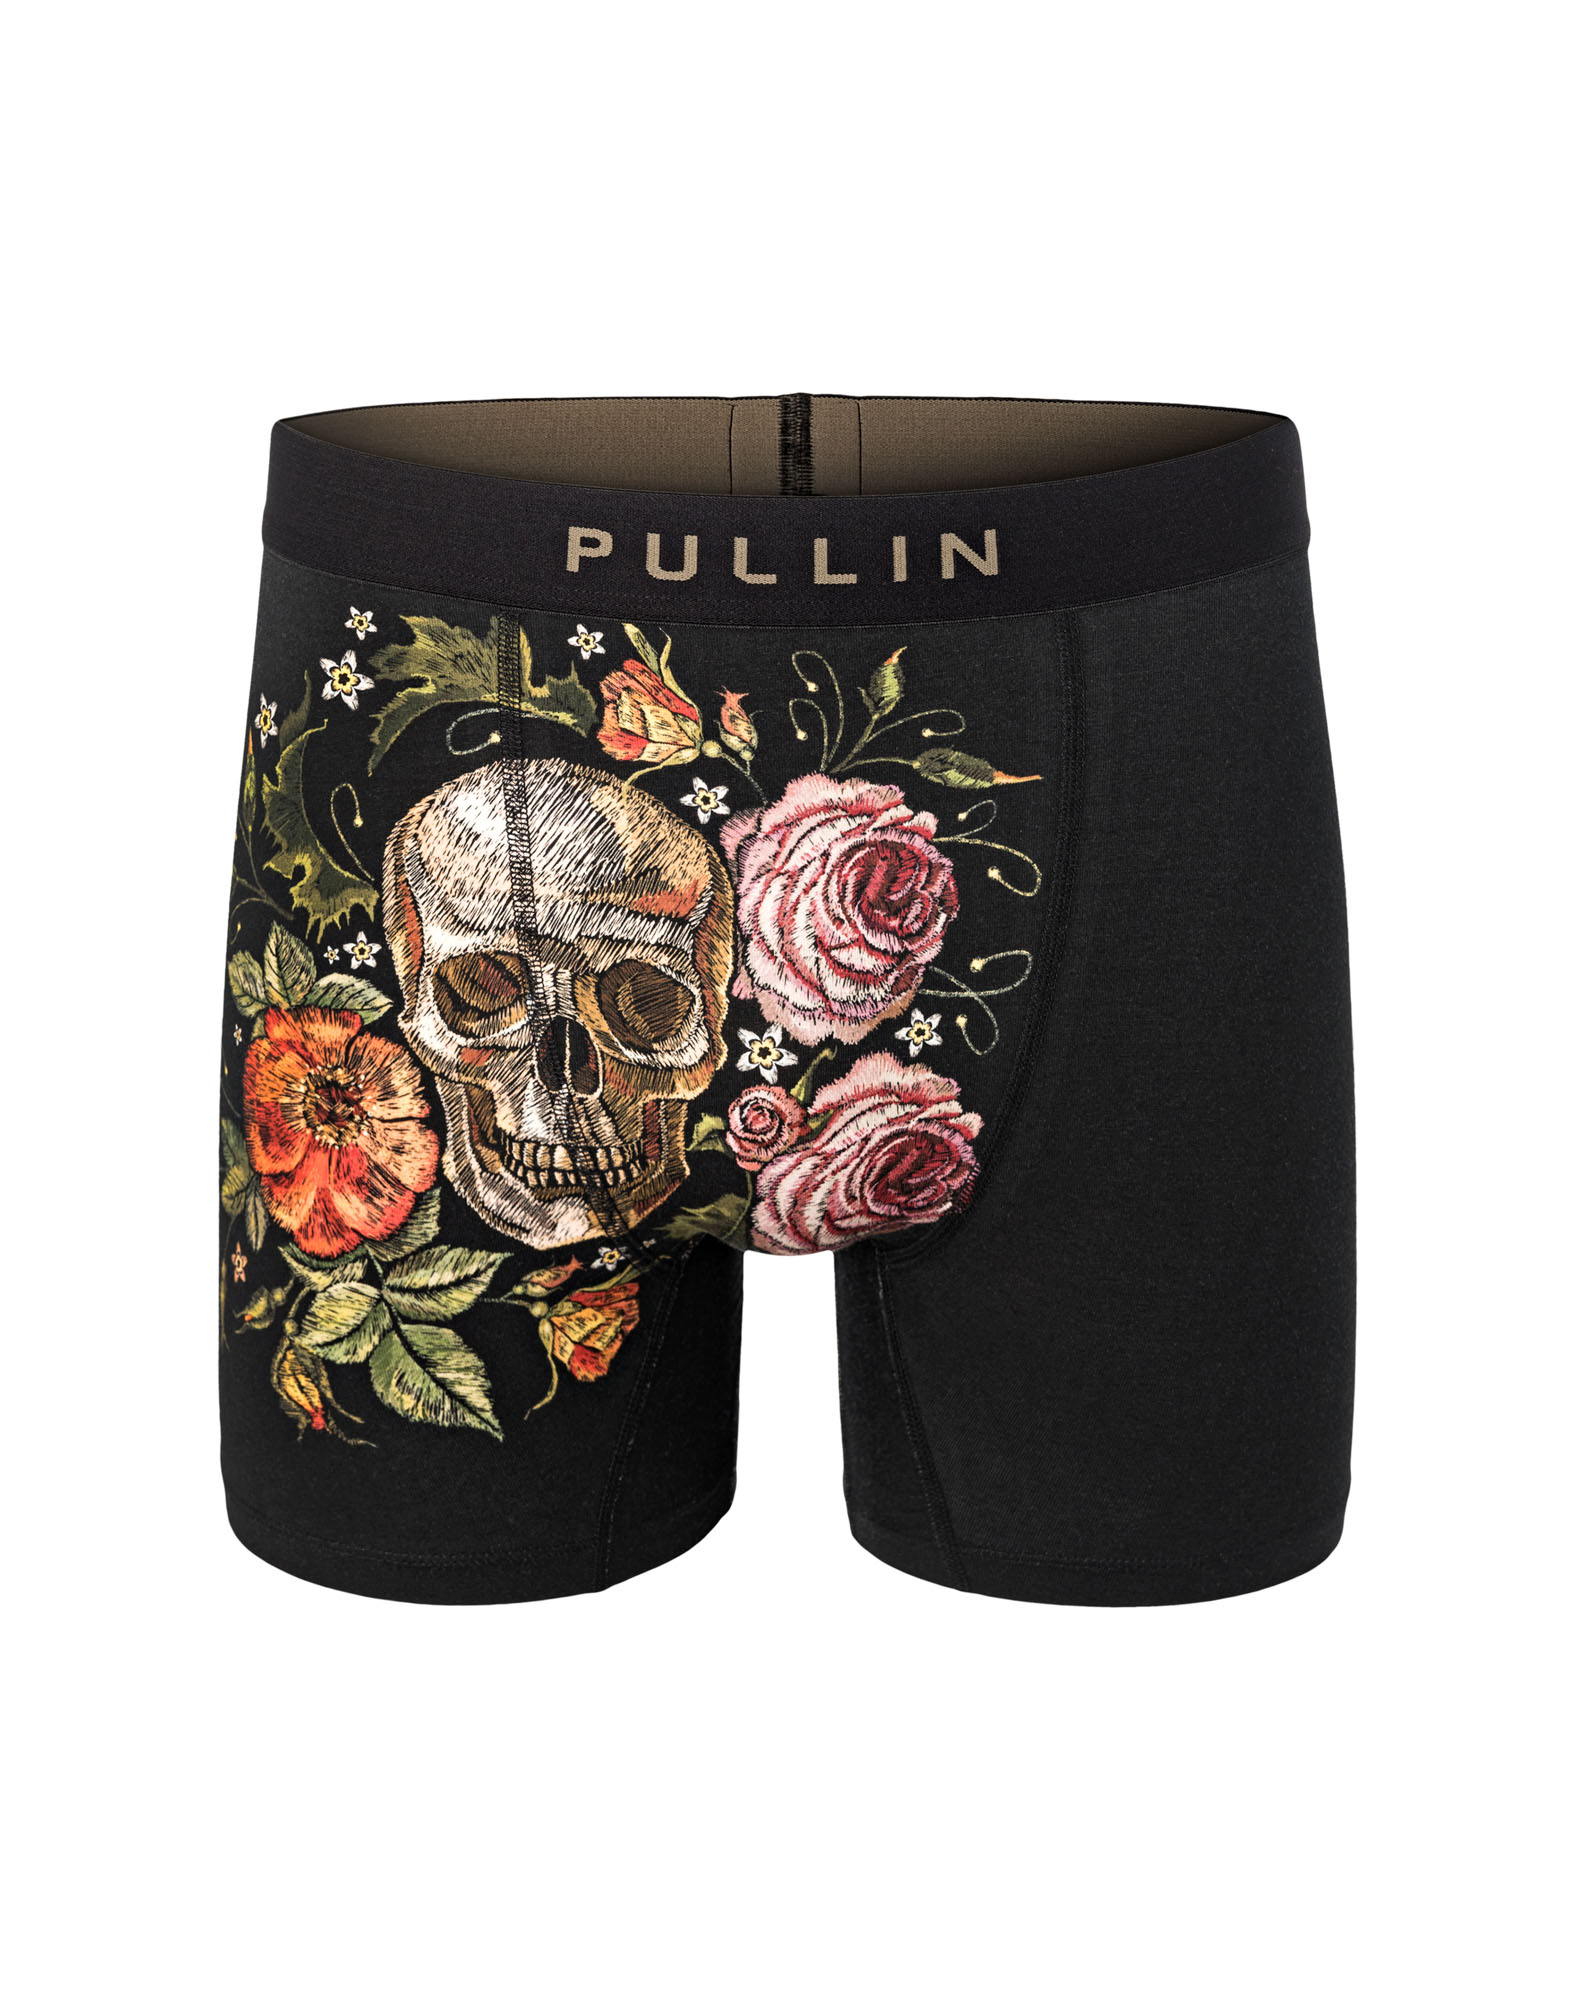 Men's trunk FASHION 2 SKULLEMBY